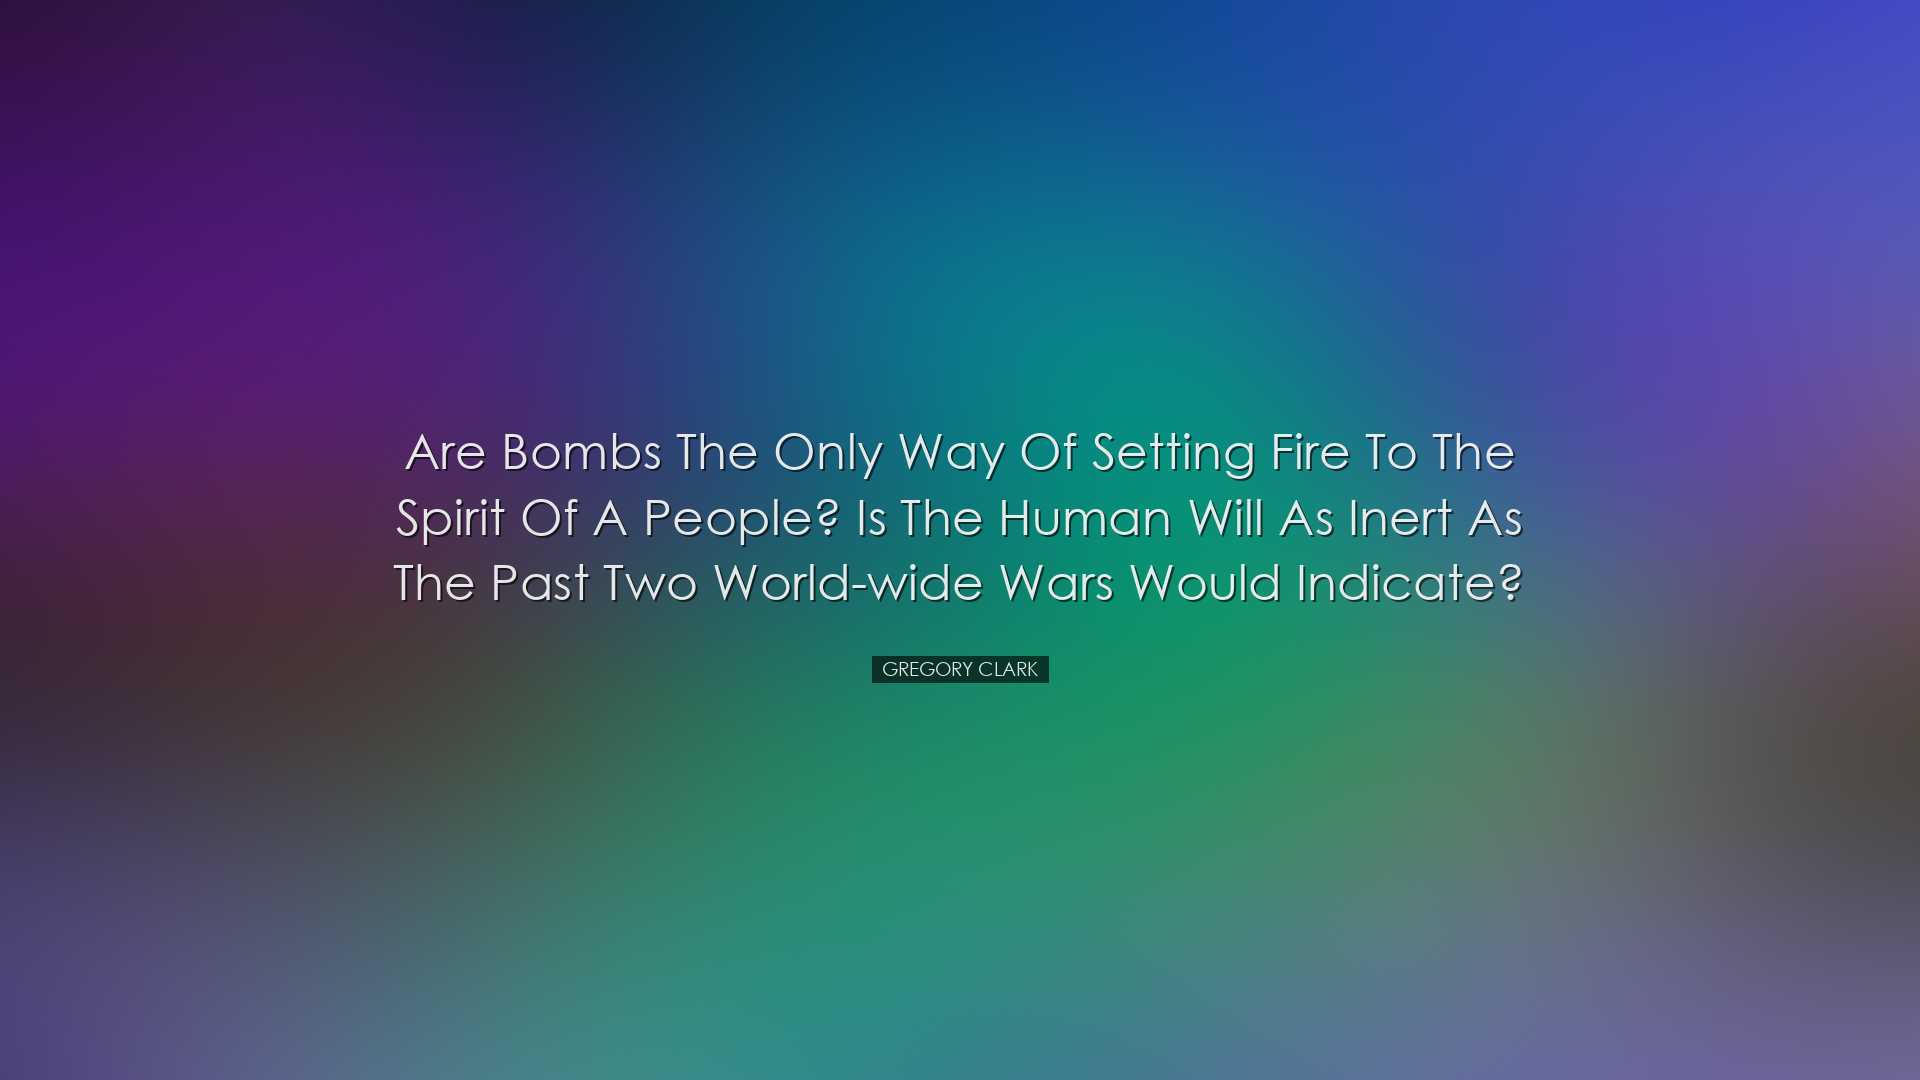 Are bombs the only way of setting fire to the spirit of a people?